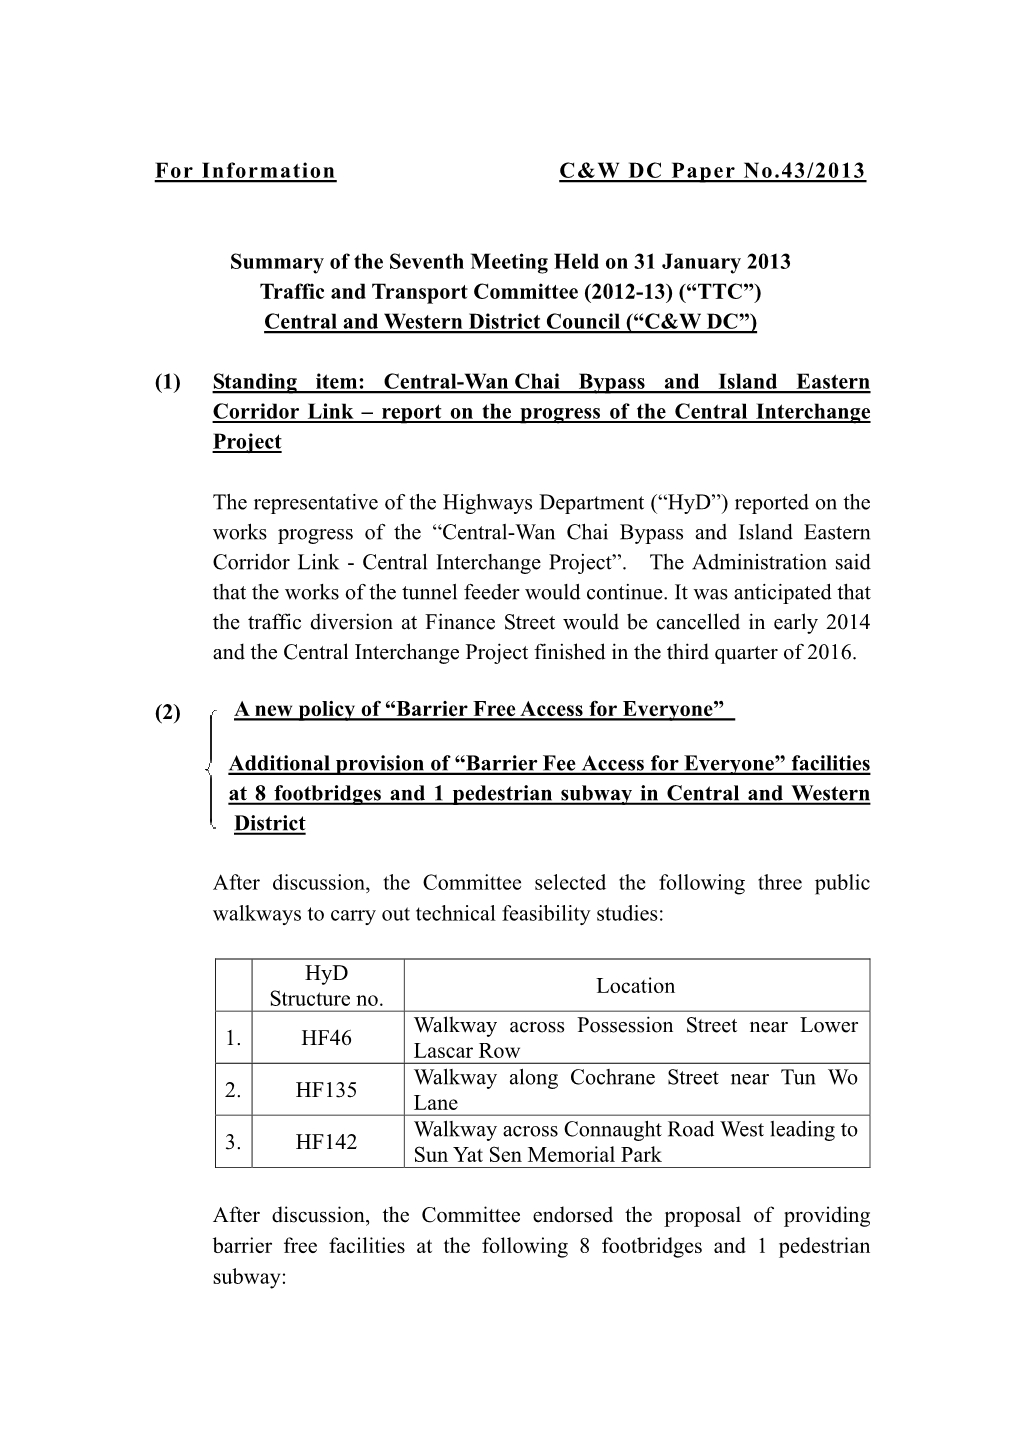 Summary of the Seventh Meeting Held on 31 January 2013 Traffic and Transport Committee (2012-13) (“TTC”) Central and Western District Council (“C&W DC”)